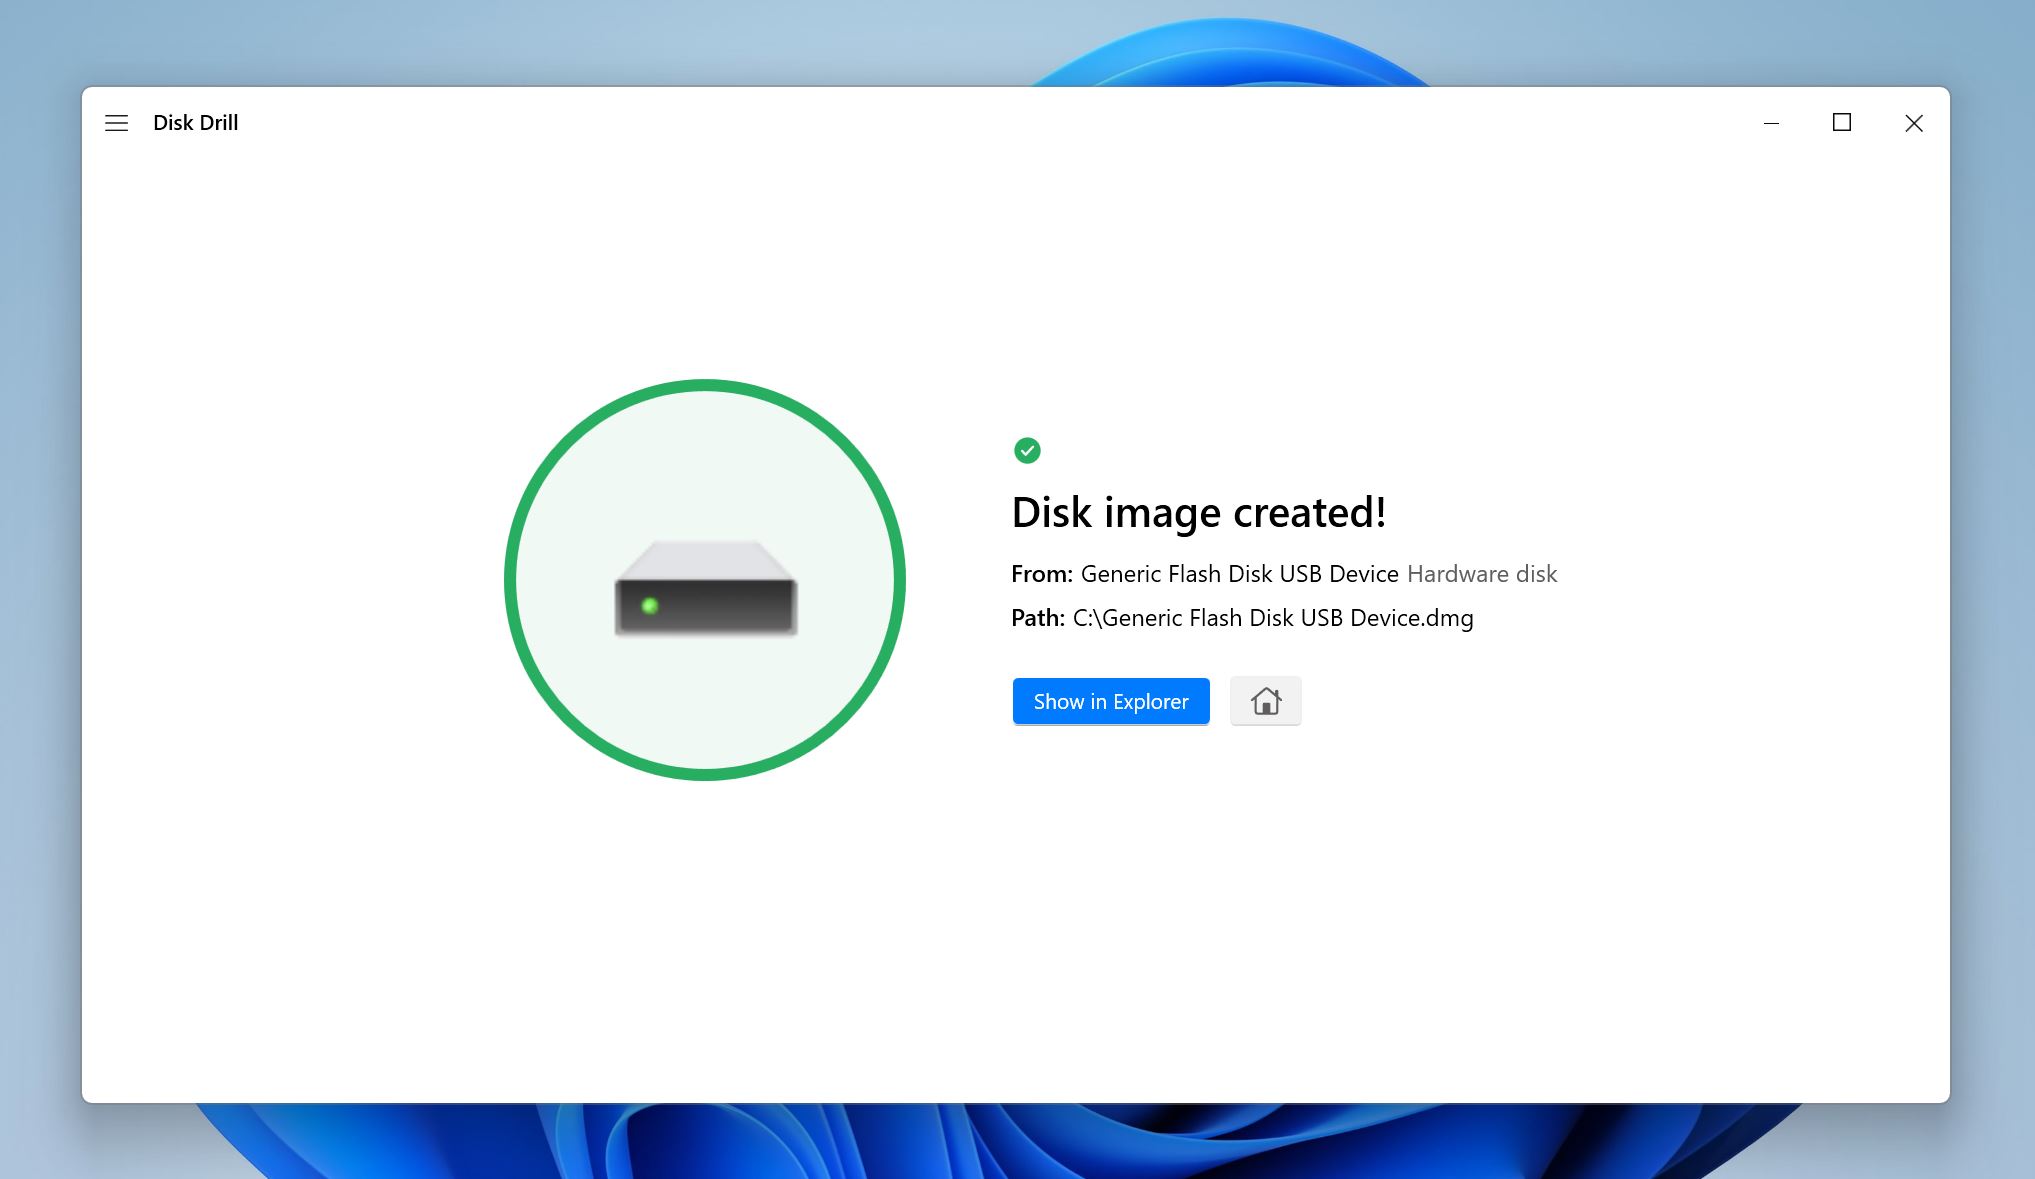 A notification from Disk Drill stating 'Disk image created!' for a generic flash disk USB device, with the path to the saved disk image file shown.